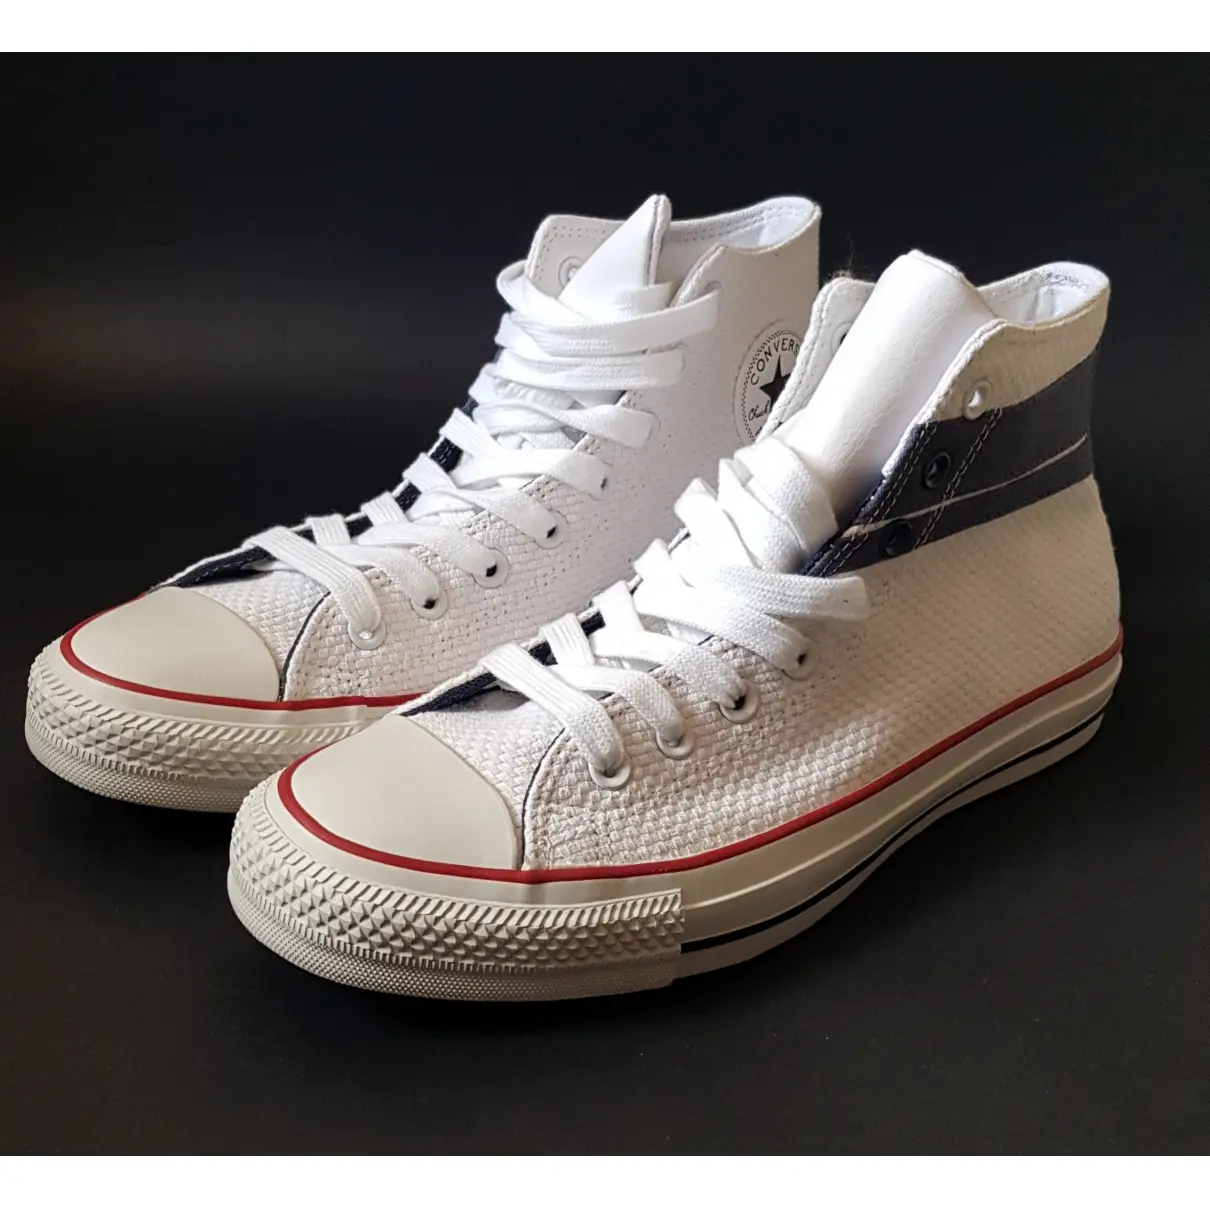 Converse Cloth high trainers for sale